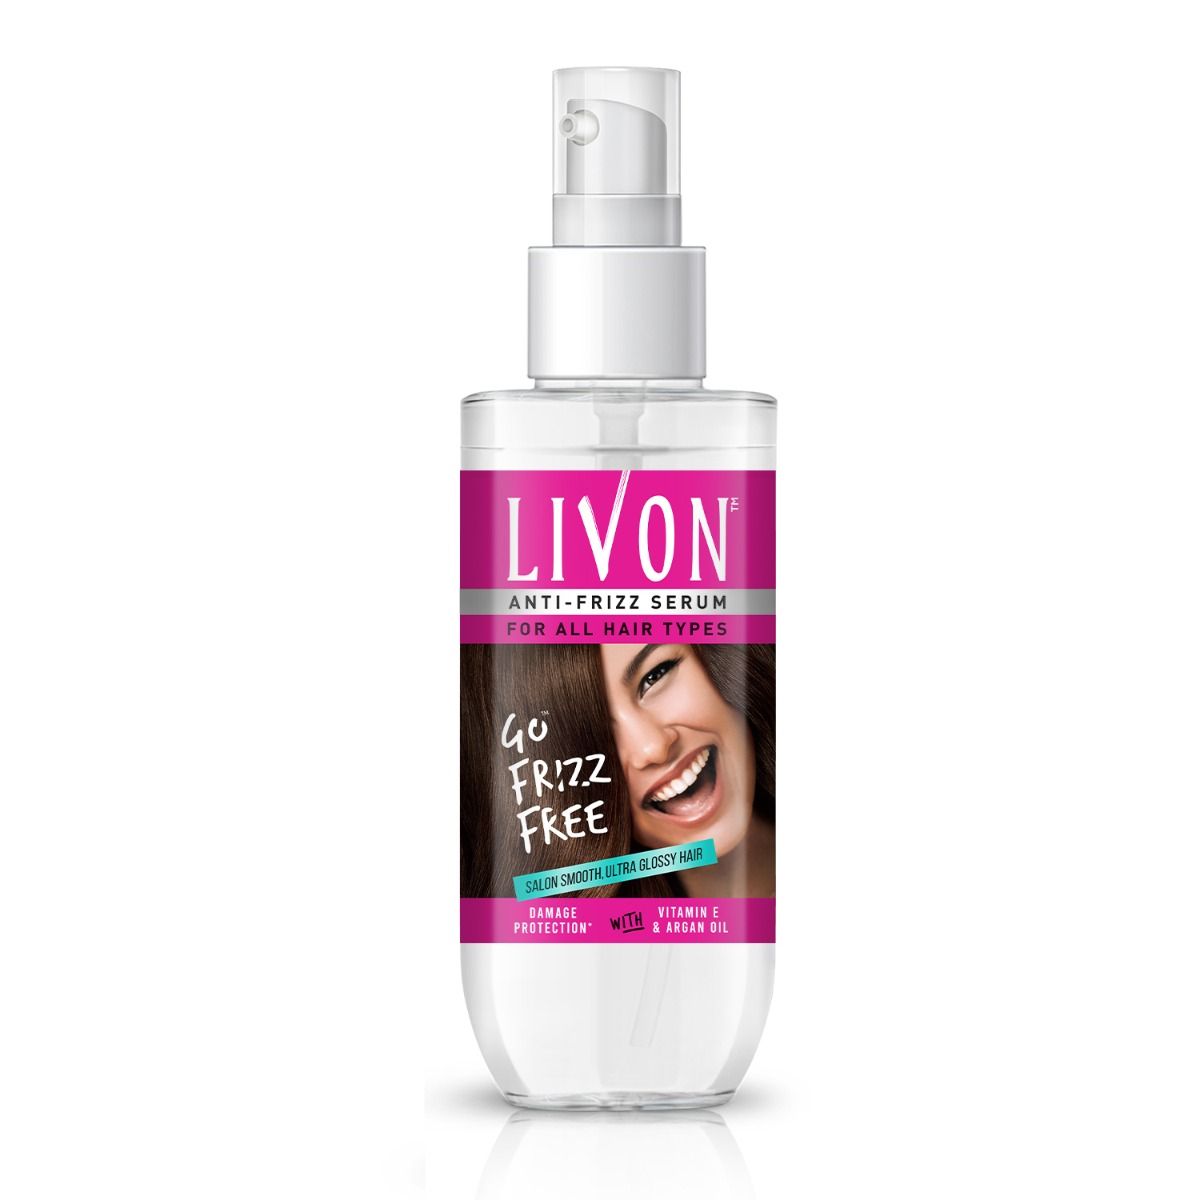 Livon Anti-Frizz Serum For All Hair Types, 100 ml Price, Uses, Side  Effects, Composition - Apollo Pharmacy